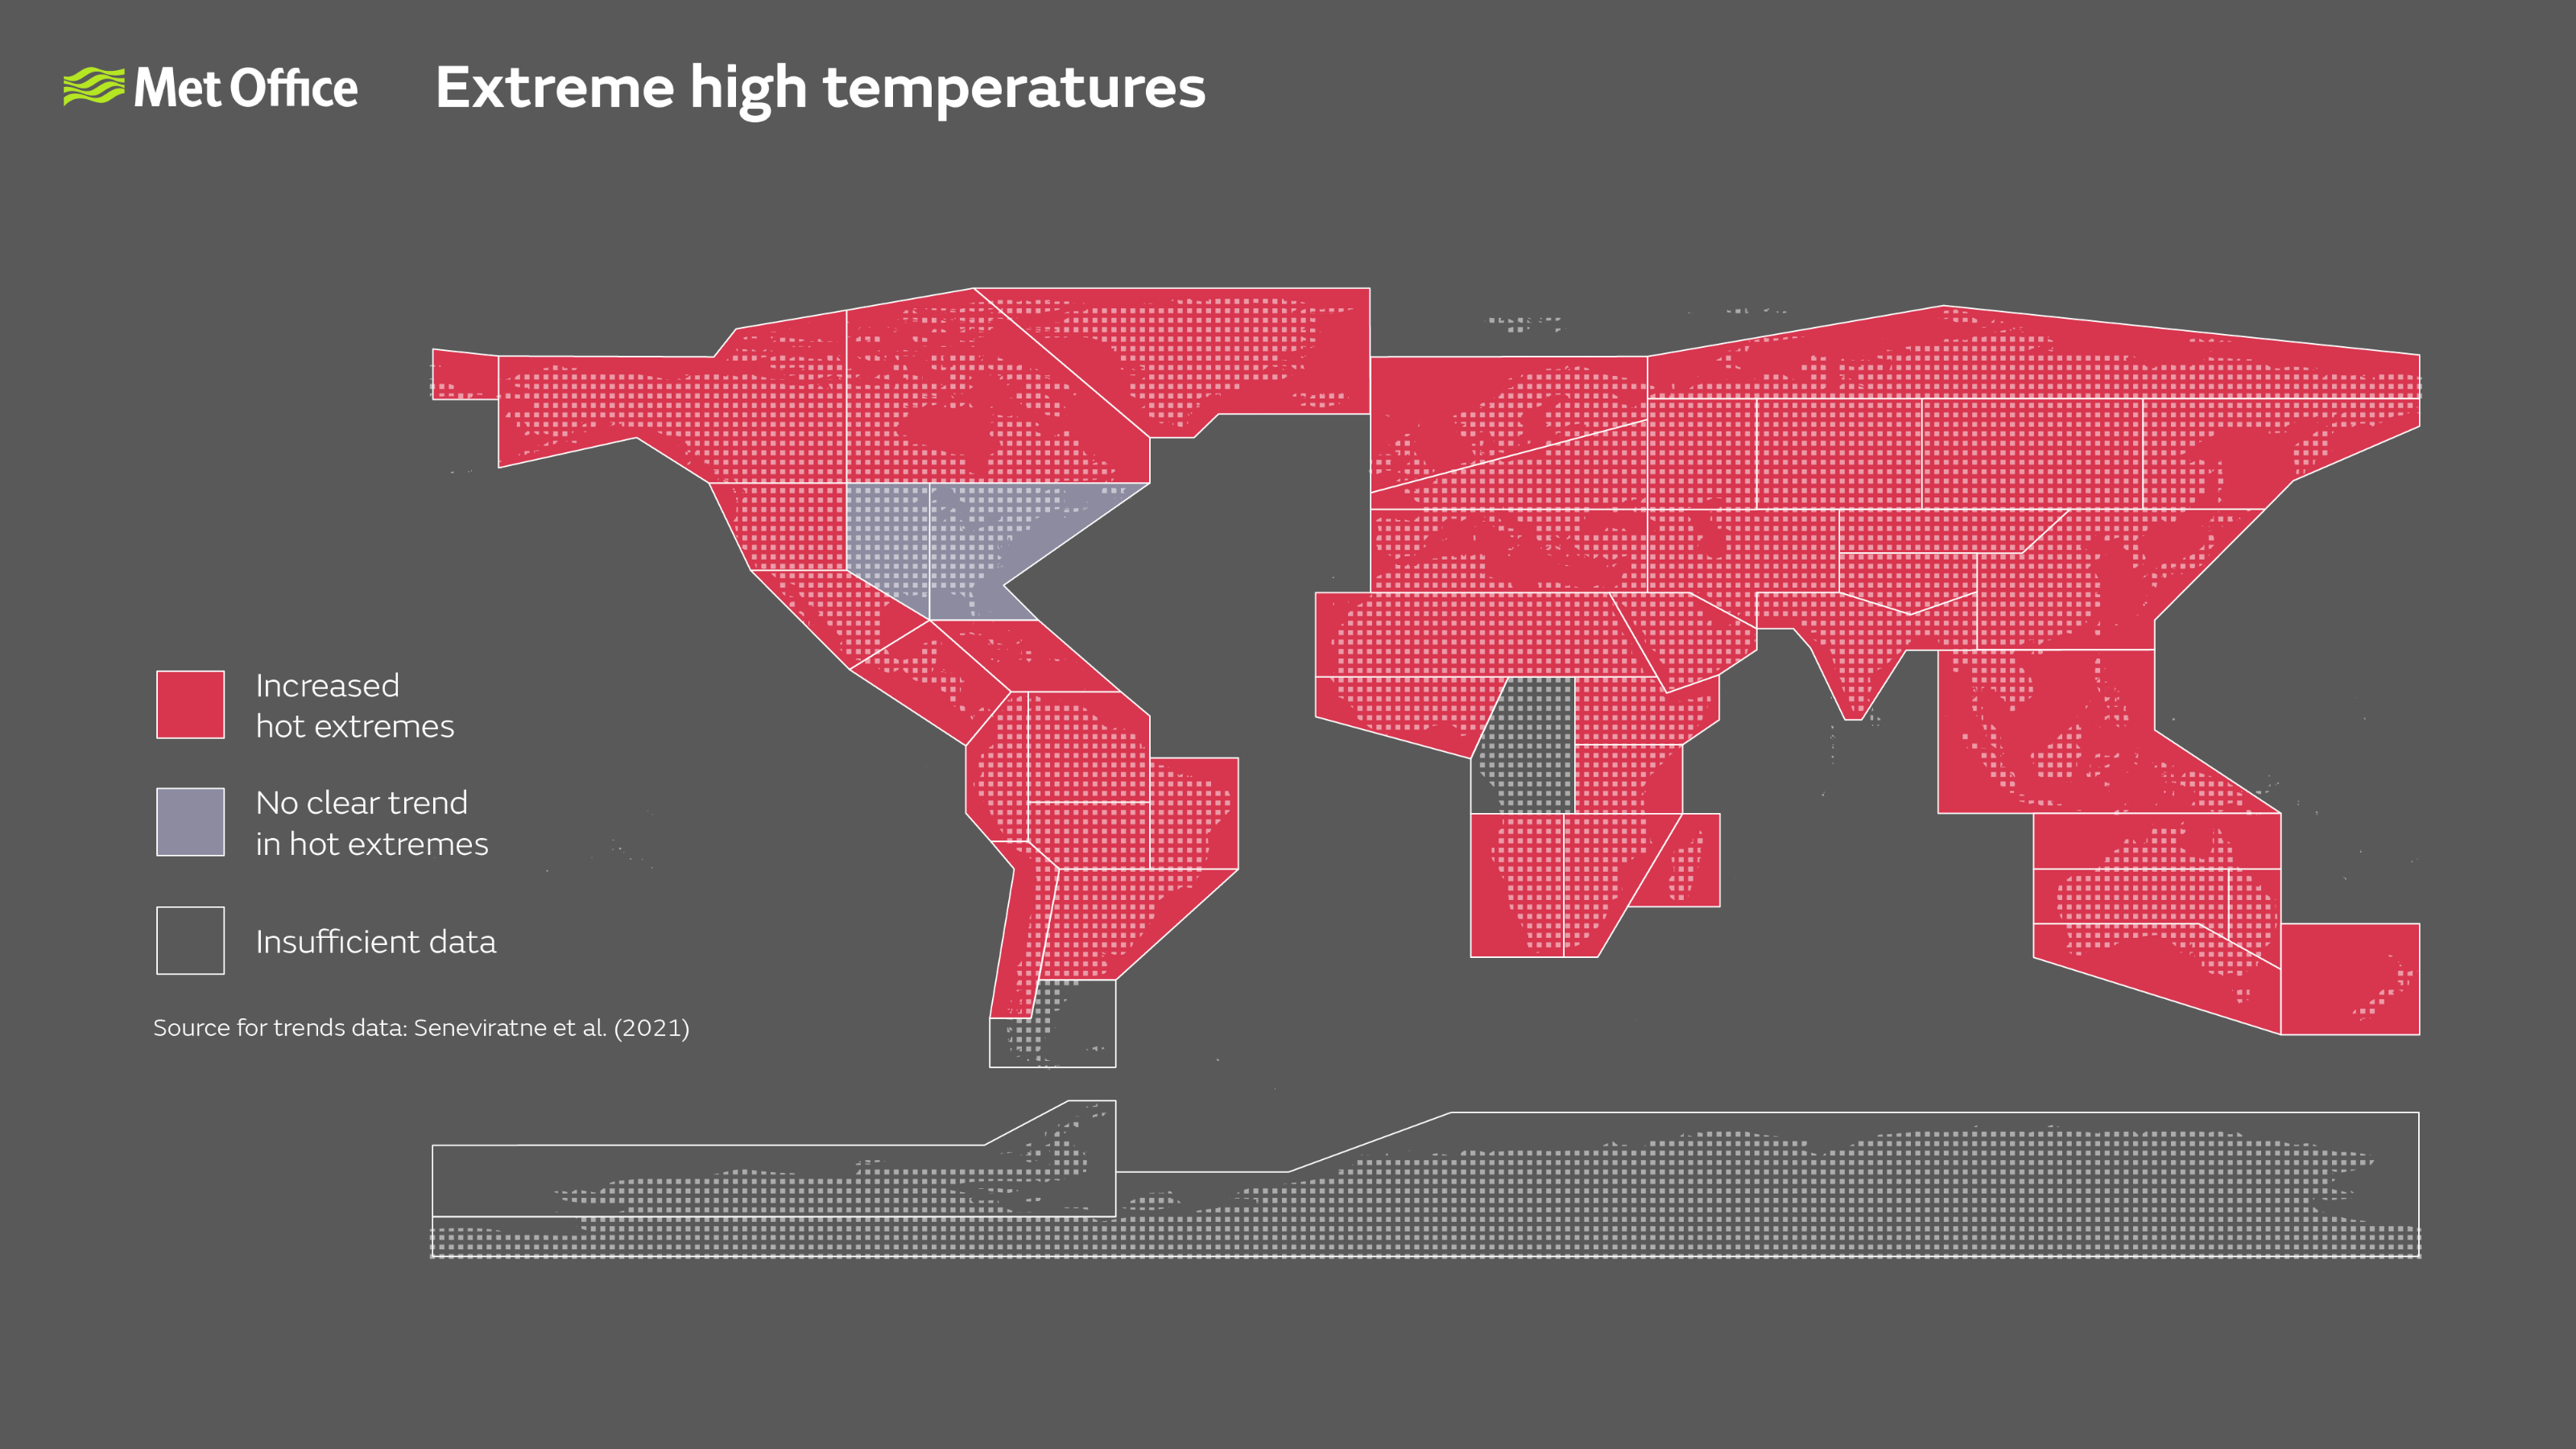 Global map showing observed changes in hot extremes since the 1950s and examples of extreme heat events with their severity / likelihood increased by anthropogenic climate change. All regions have seen an increase in hot extremes, with the exception of Eastern and Central North America where there is no clear trend, and in Central Africa, Southern South America and Antarctica where there is insufficient data.